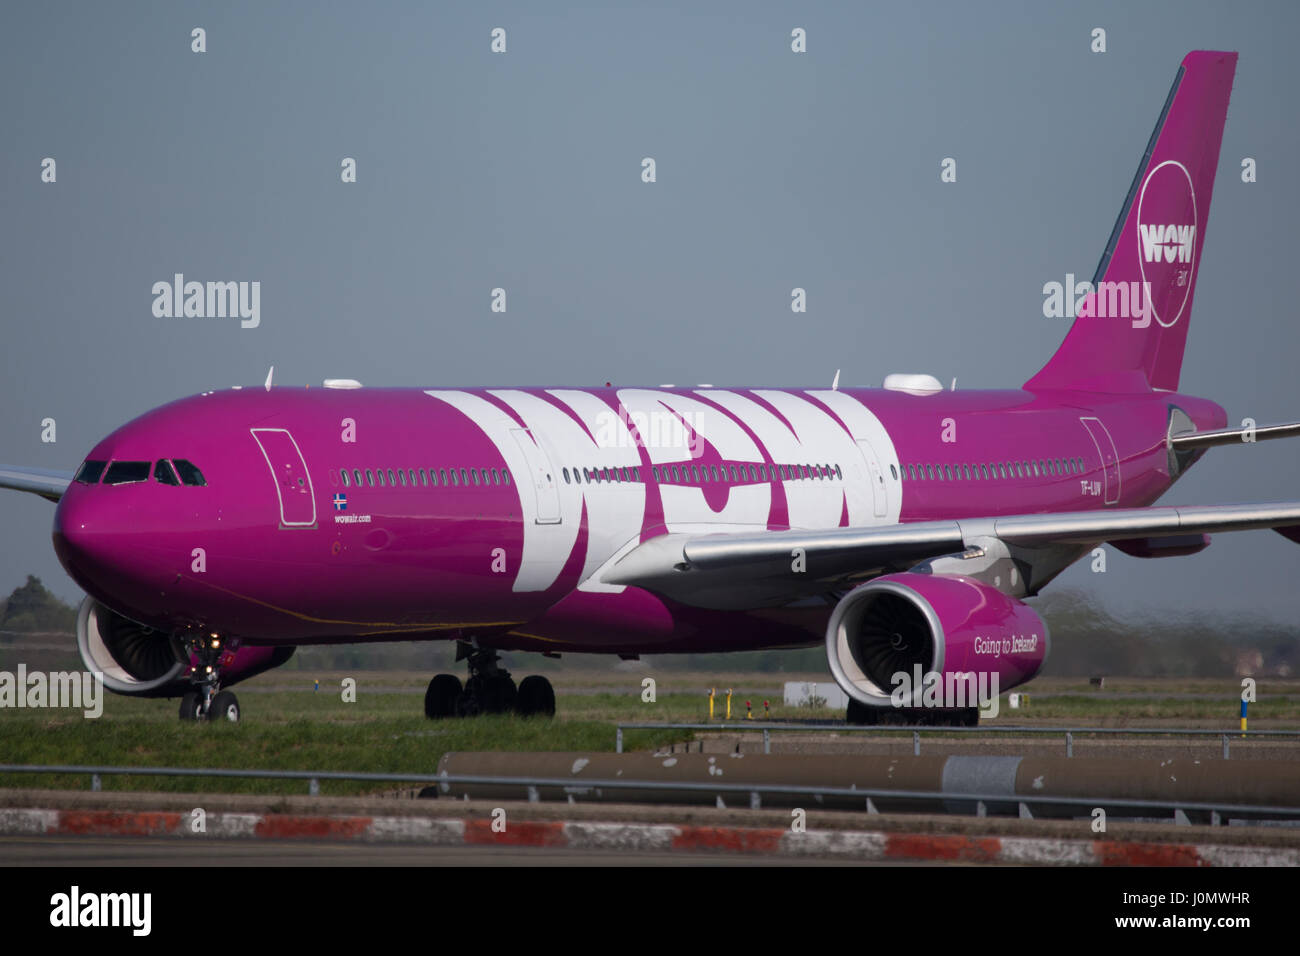 Wow Airlines Iceland Airbus A330 Aircraft Stock Photo